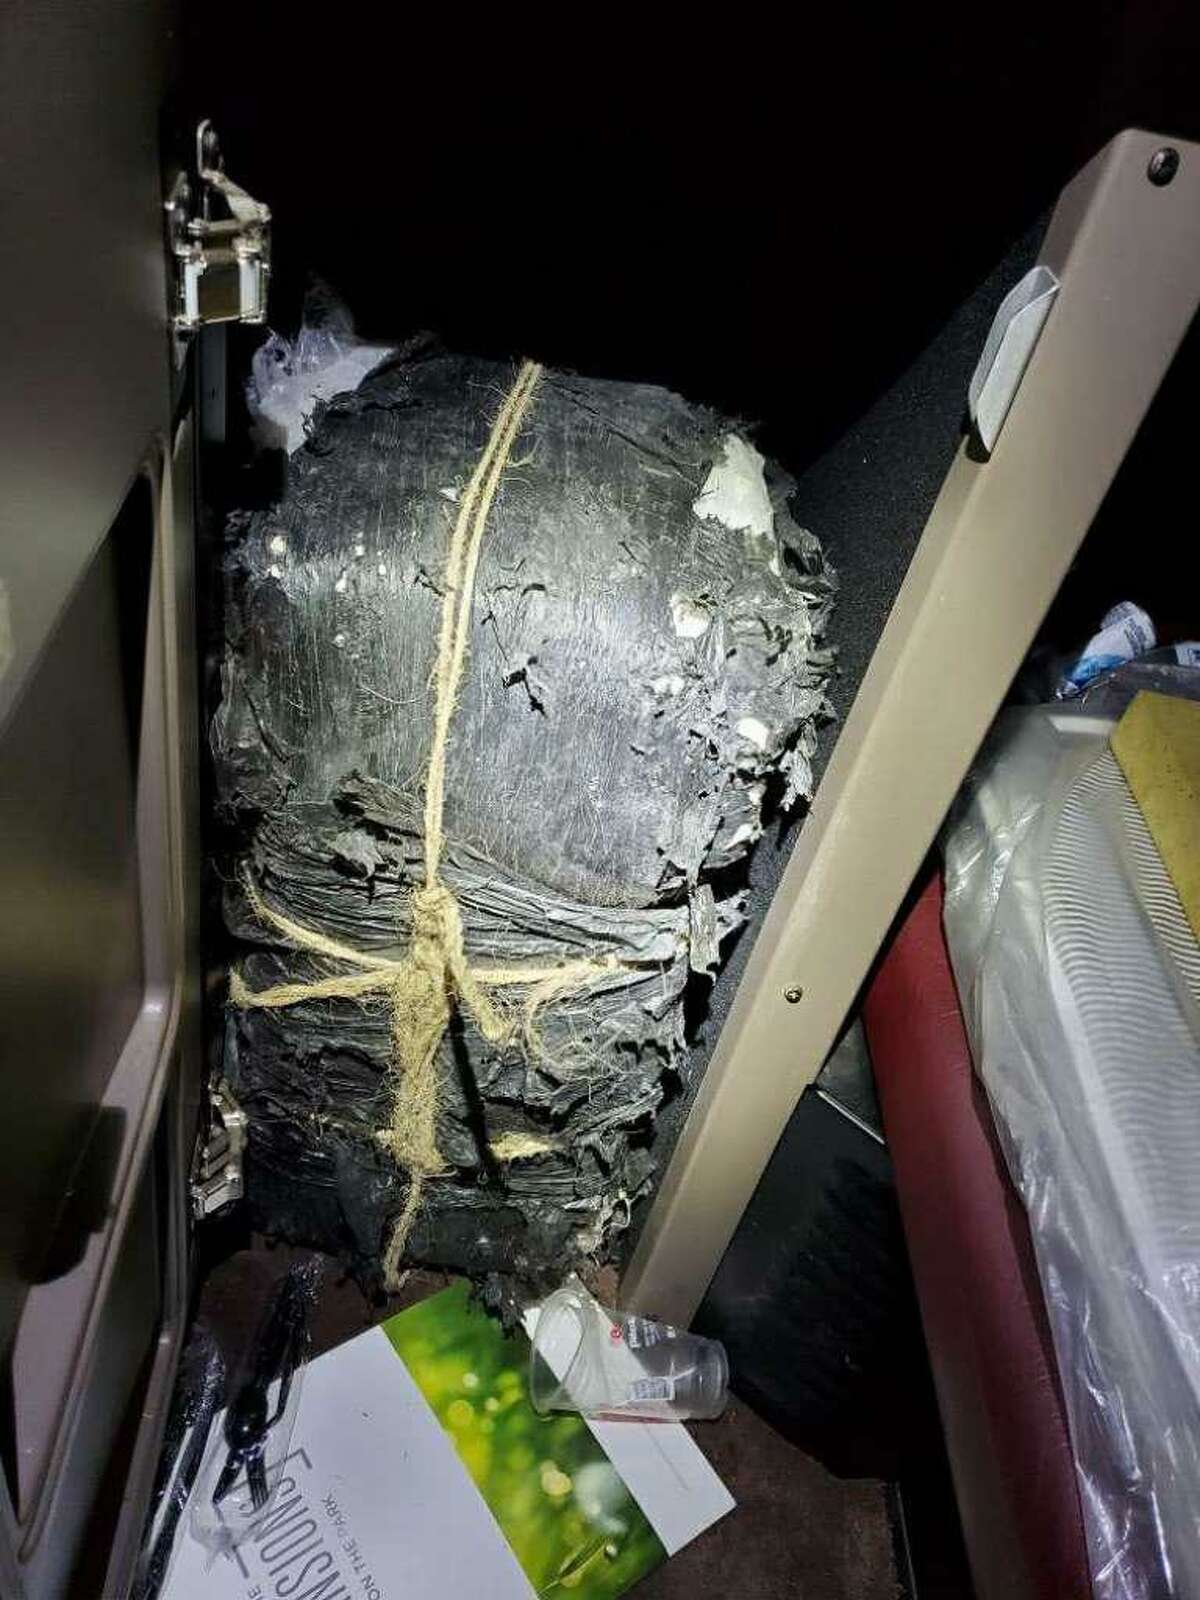 U.S. Border Patrol agents said they found these bundles of marijuana inside the sleeper cab of a tractor-trailer.